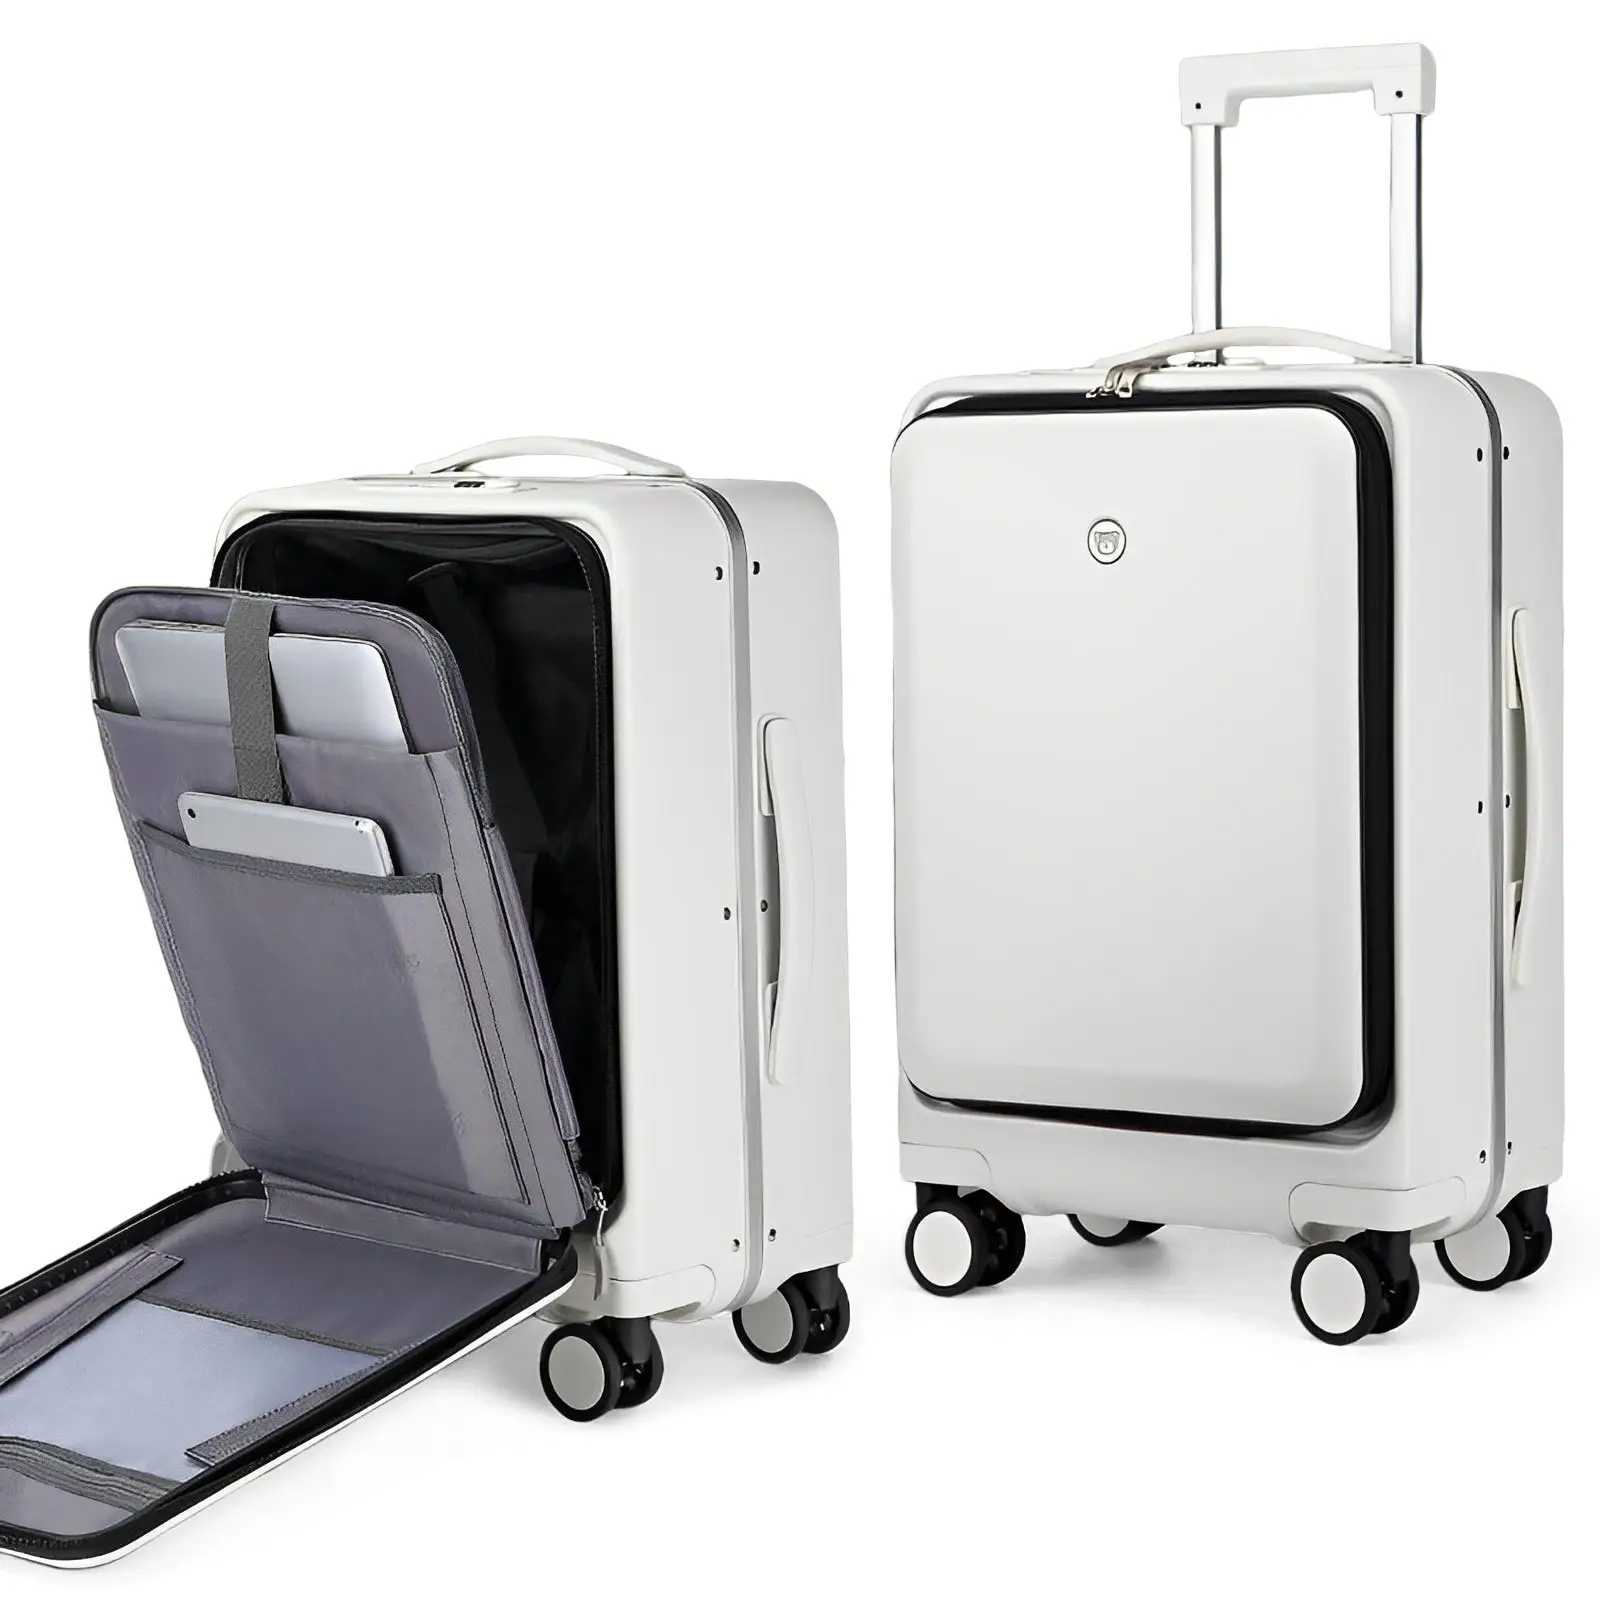 ABS Travel Trolley Luggage Expandable Trolley Bag Carry On Luggage Lightweight Suitcase Suit Case